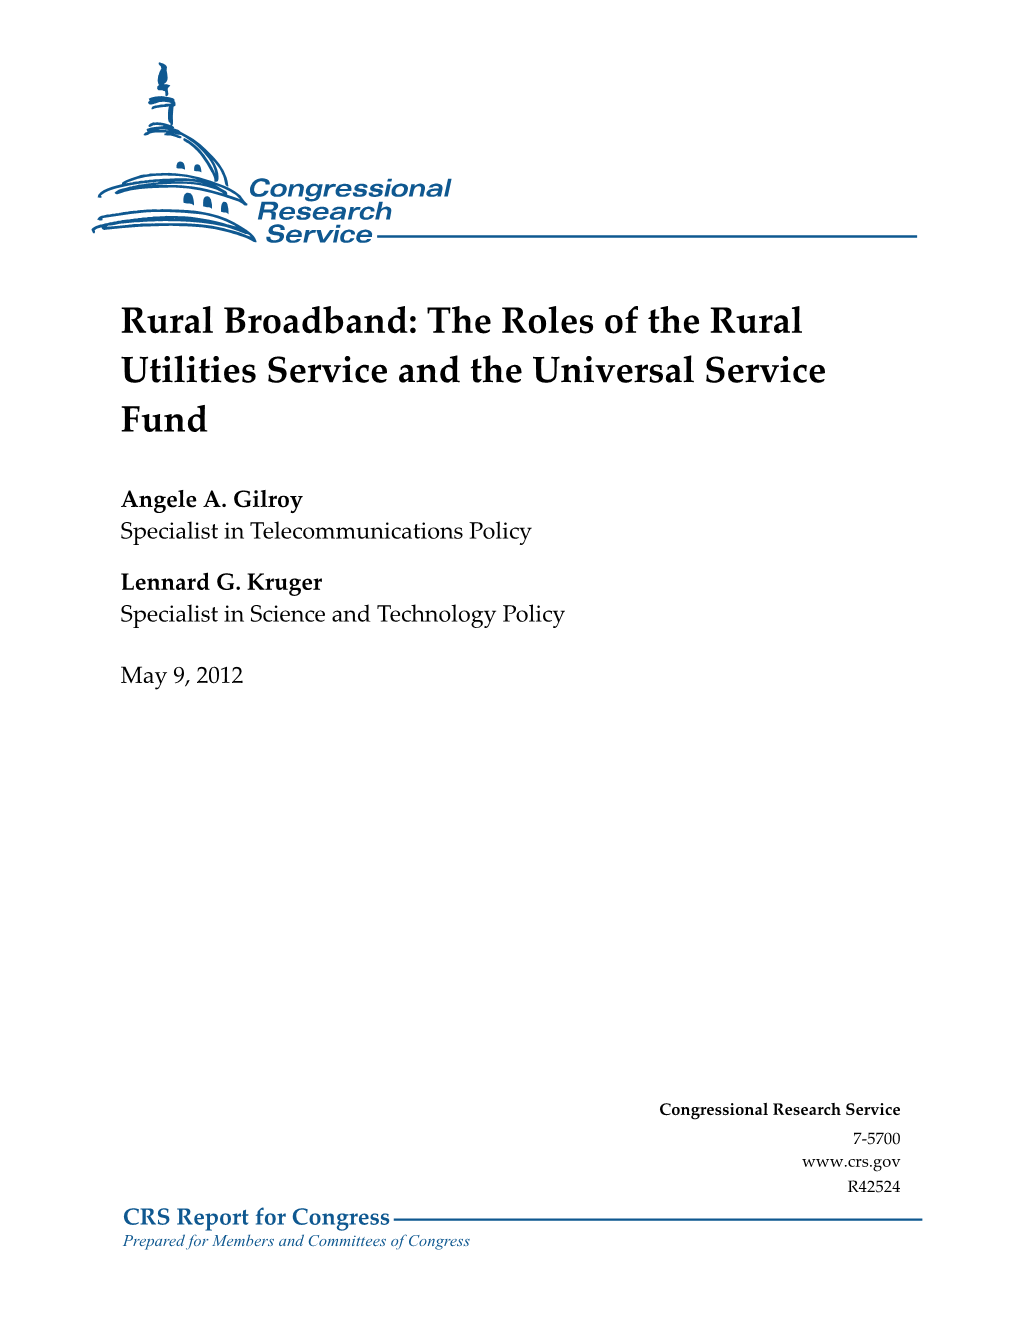 The Roles of the Rural Utilities Service and the Universal Service Fund